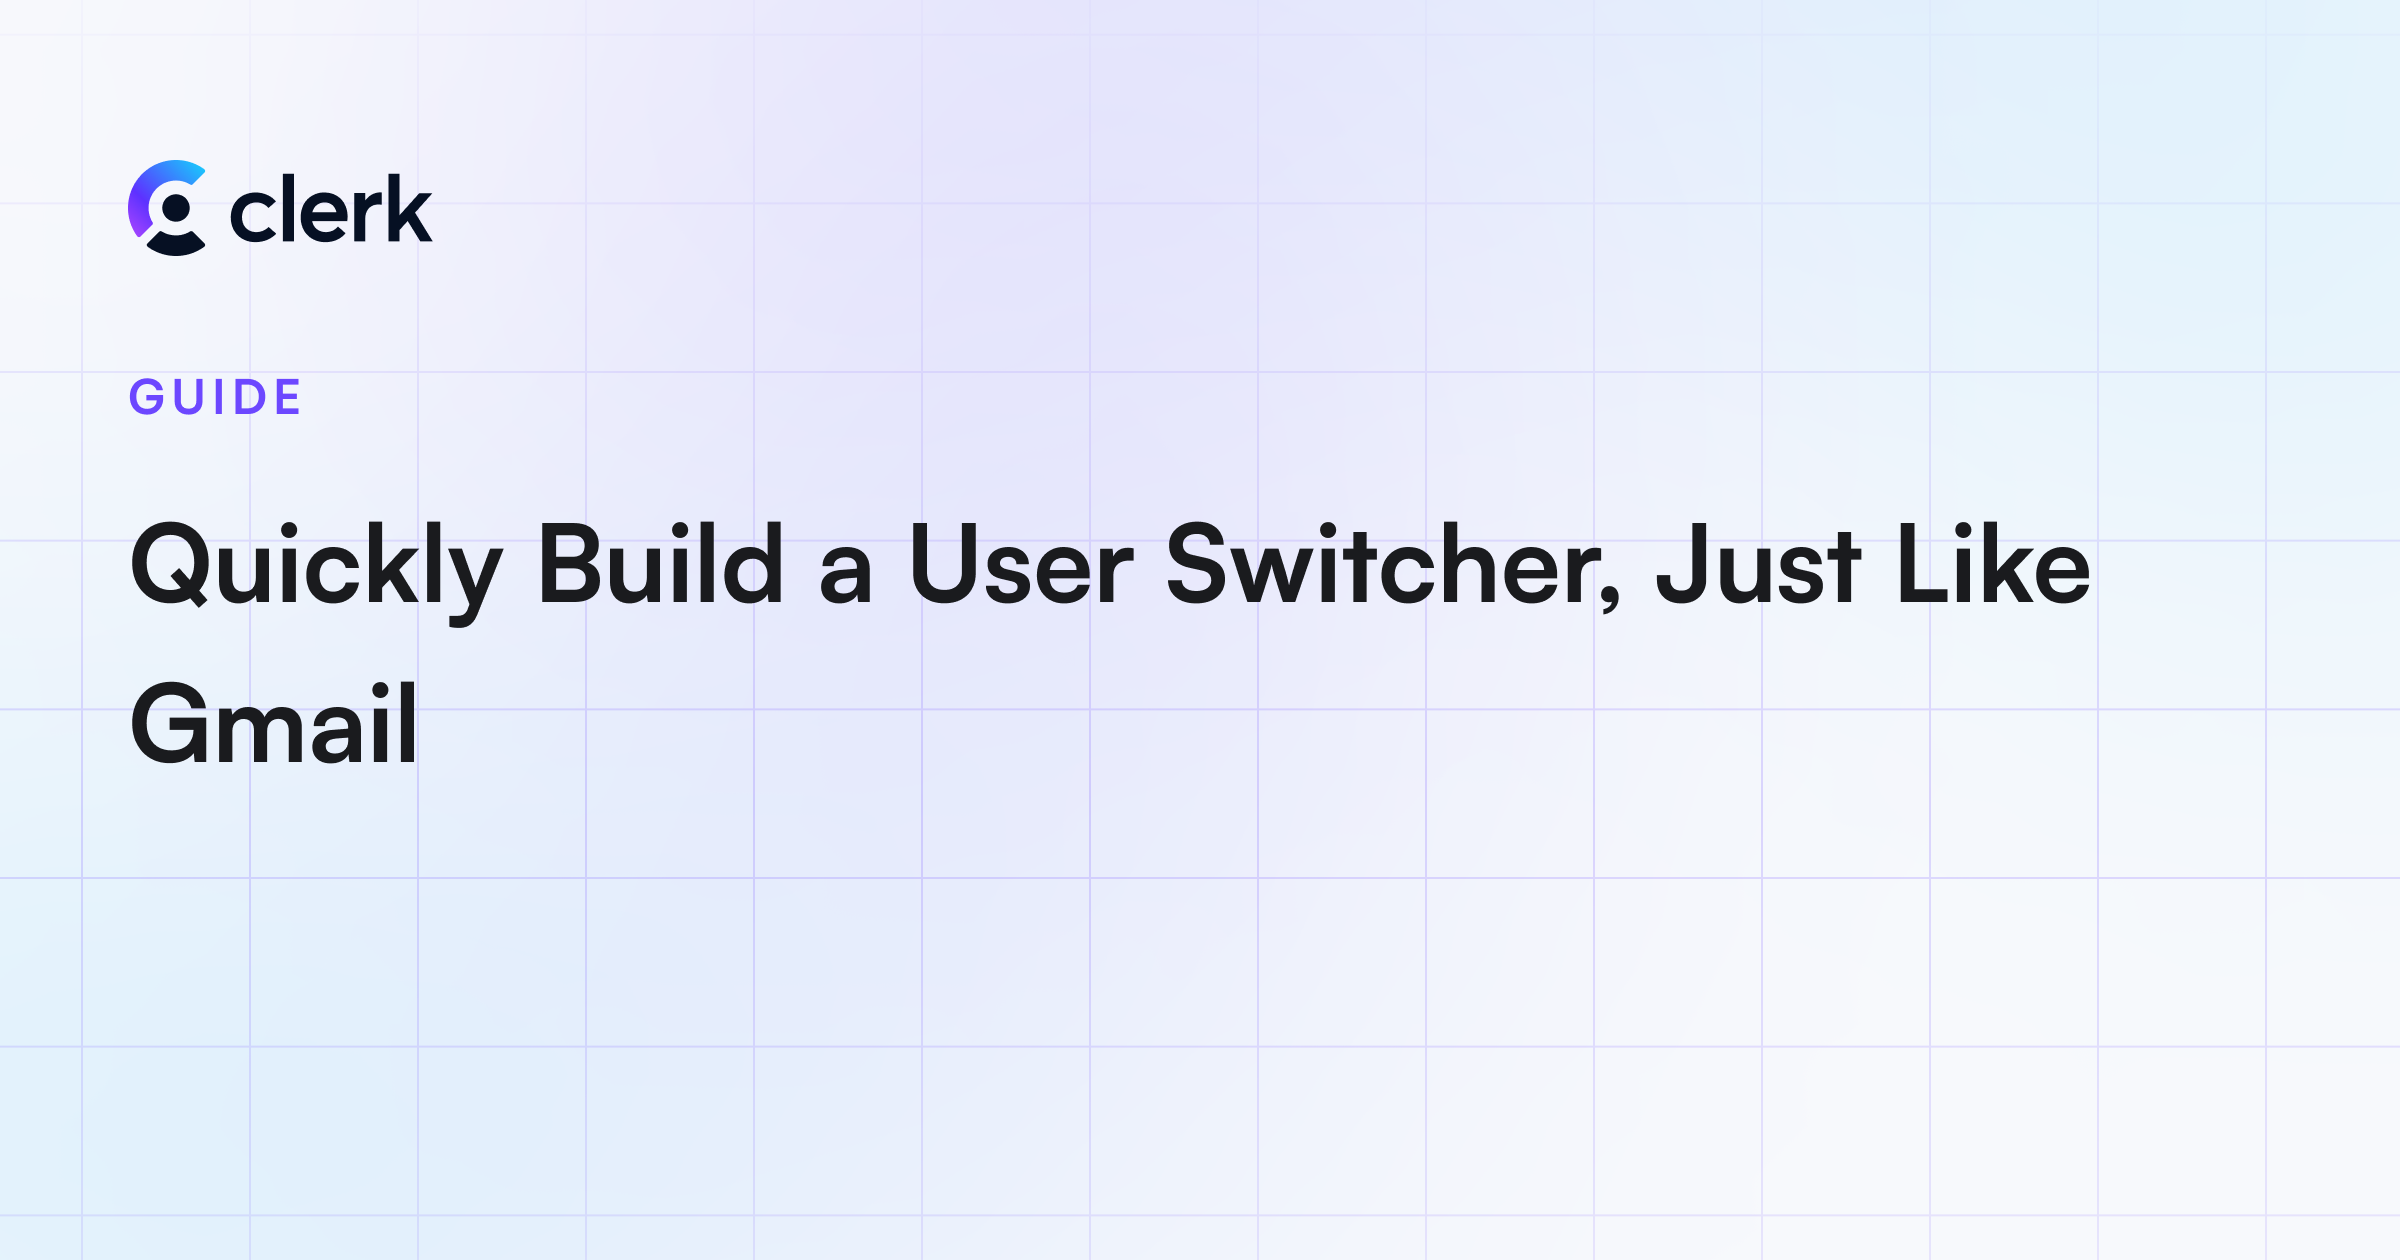 Quickly Build a User Switcher, Just Like Gmail